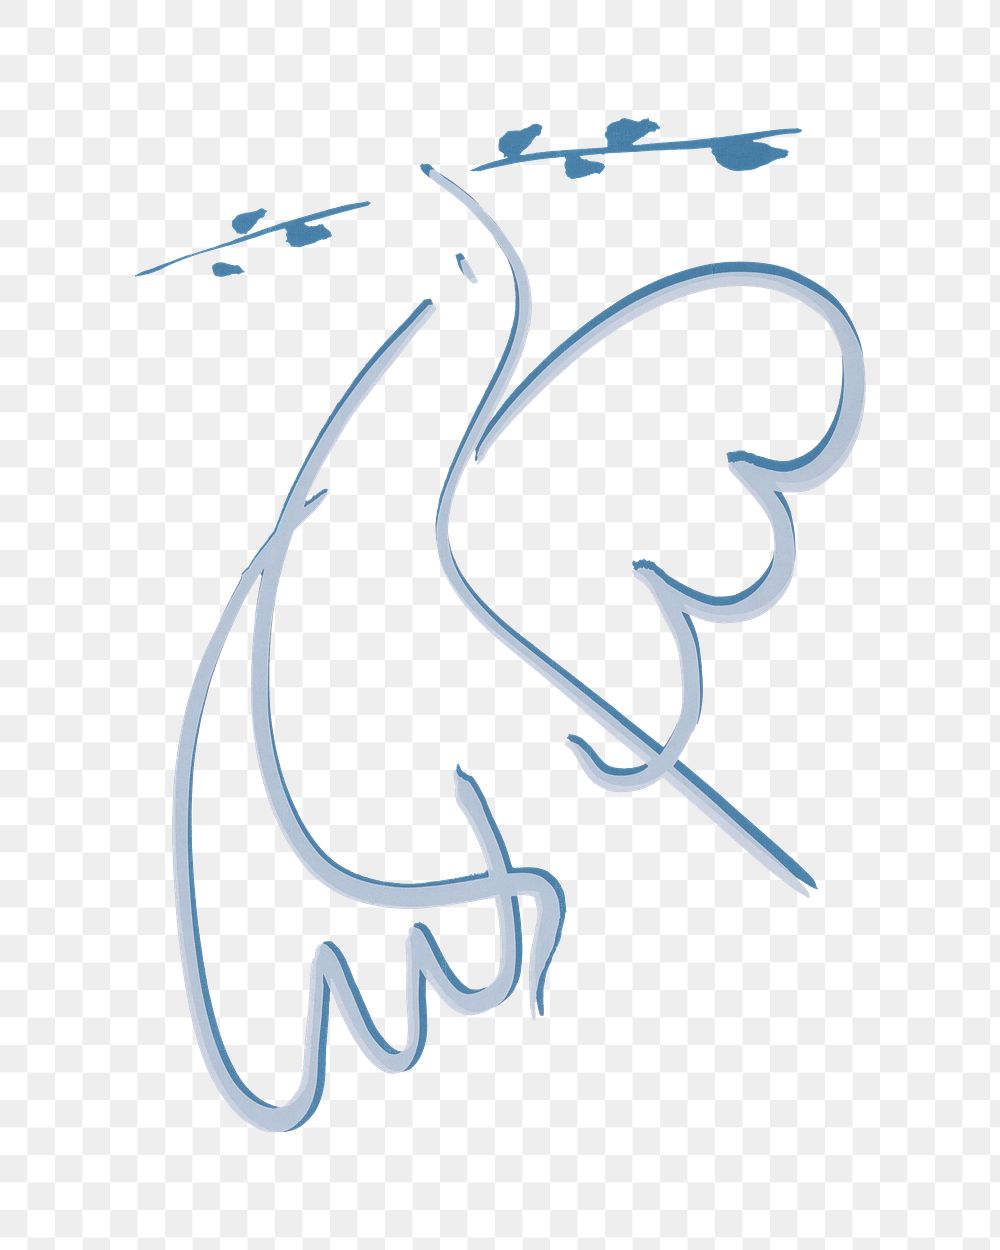 Peace dove png sticker, with branch illustration, transparent background.  Remixed by rawpixel.